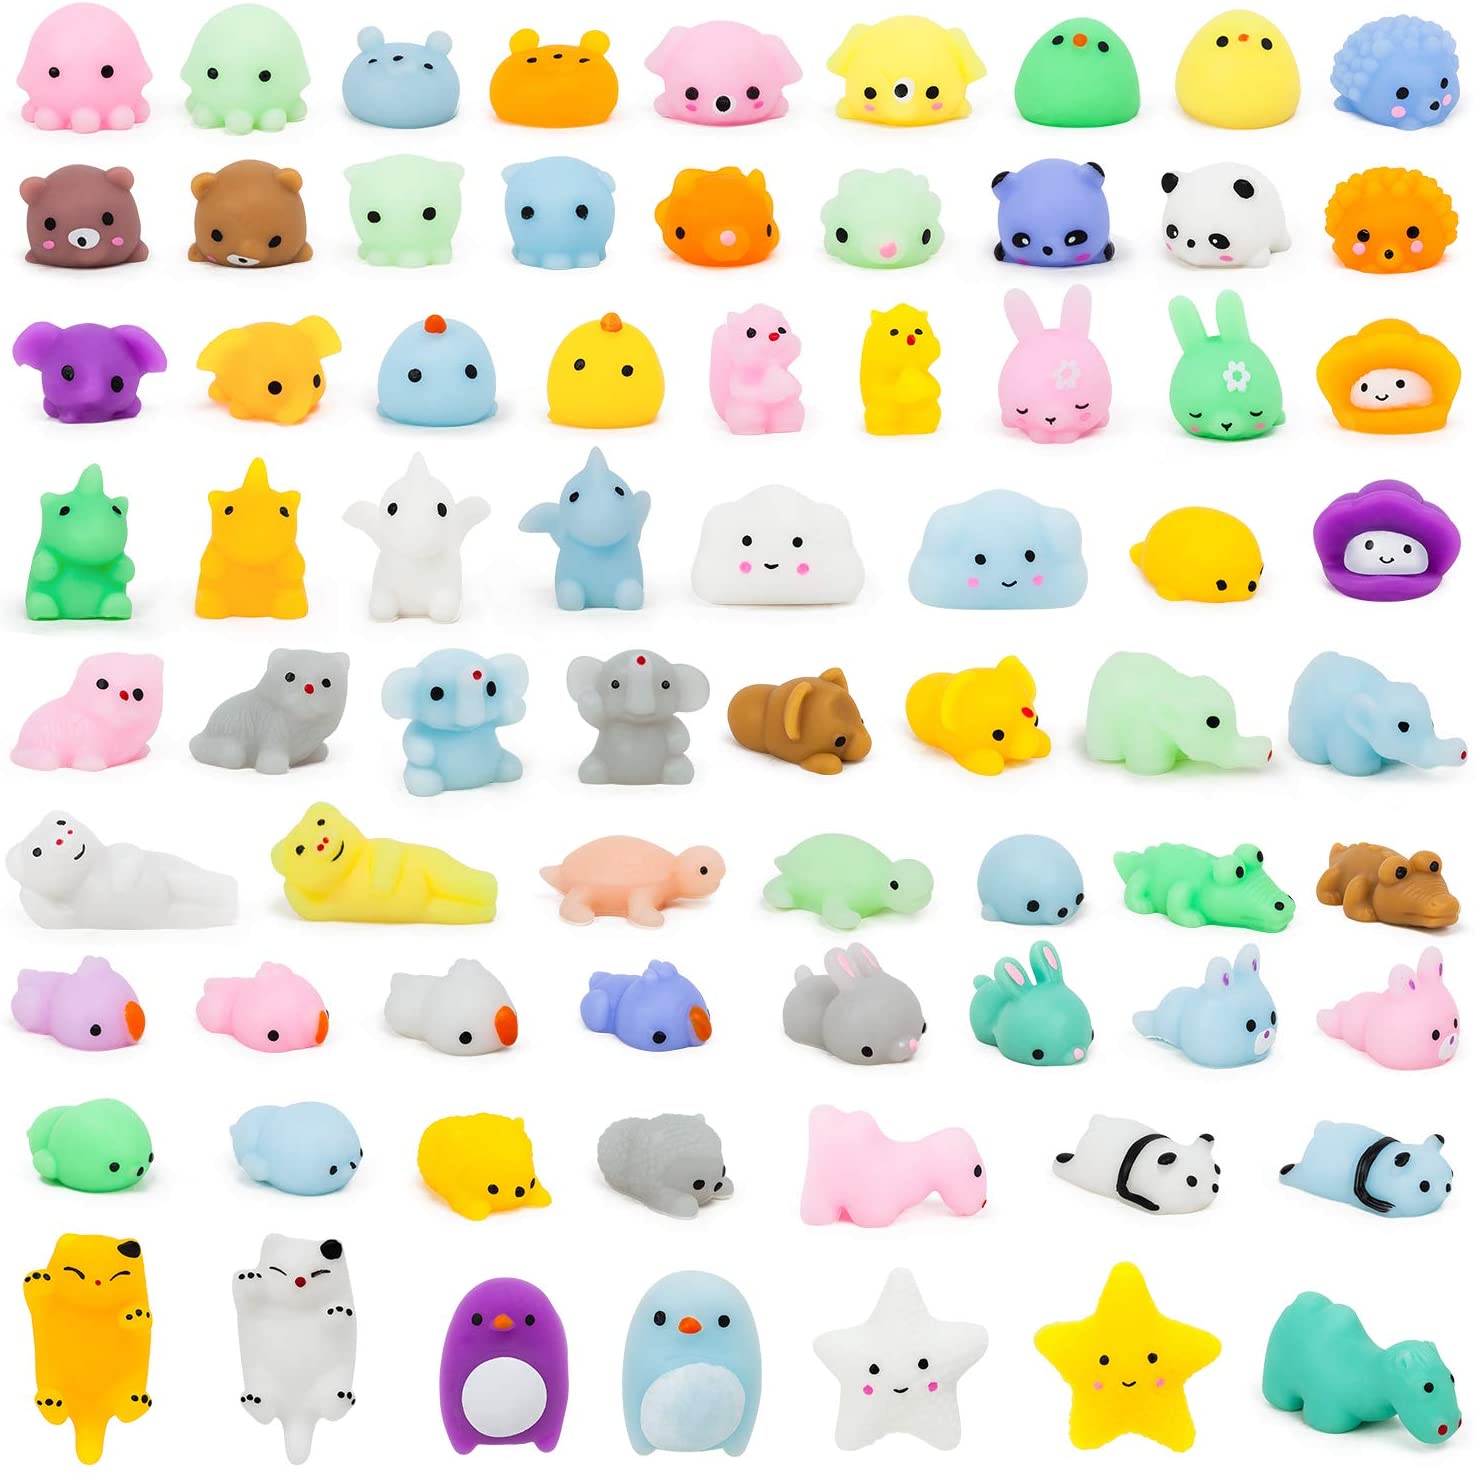 The Power of Kawaii: How Cute, Squishy Things Influence Us